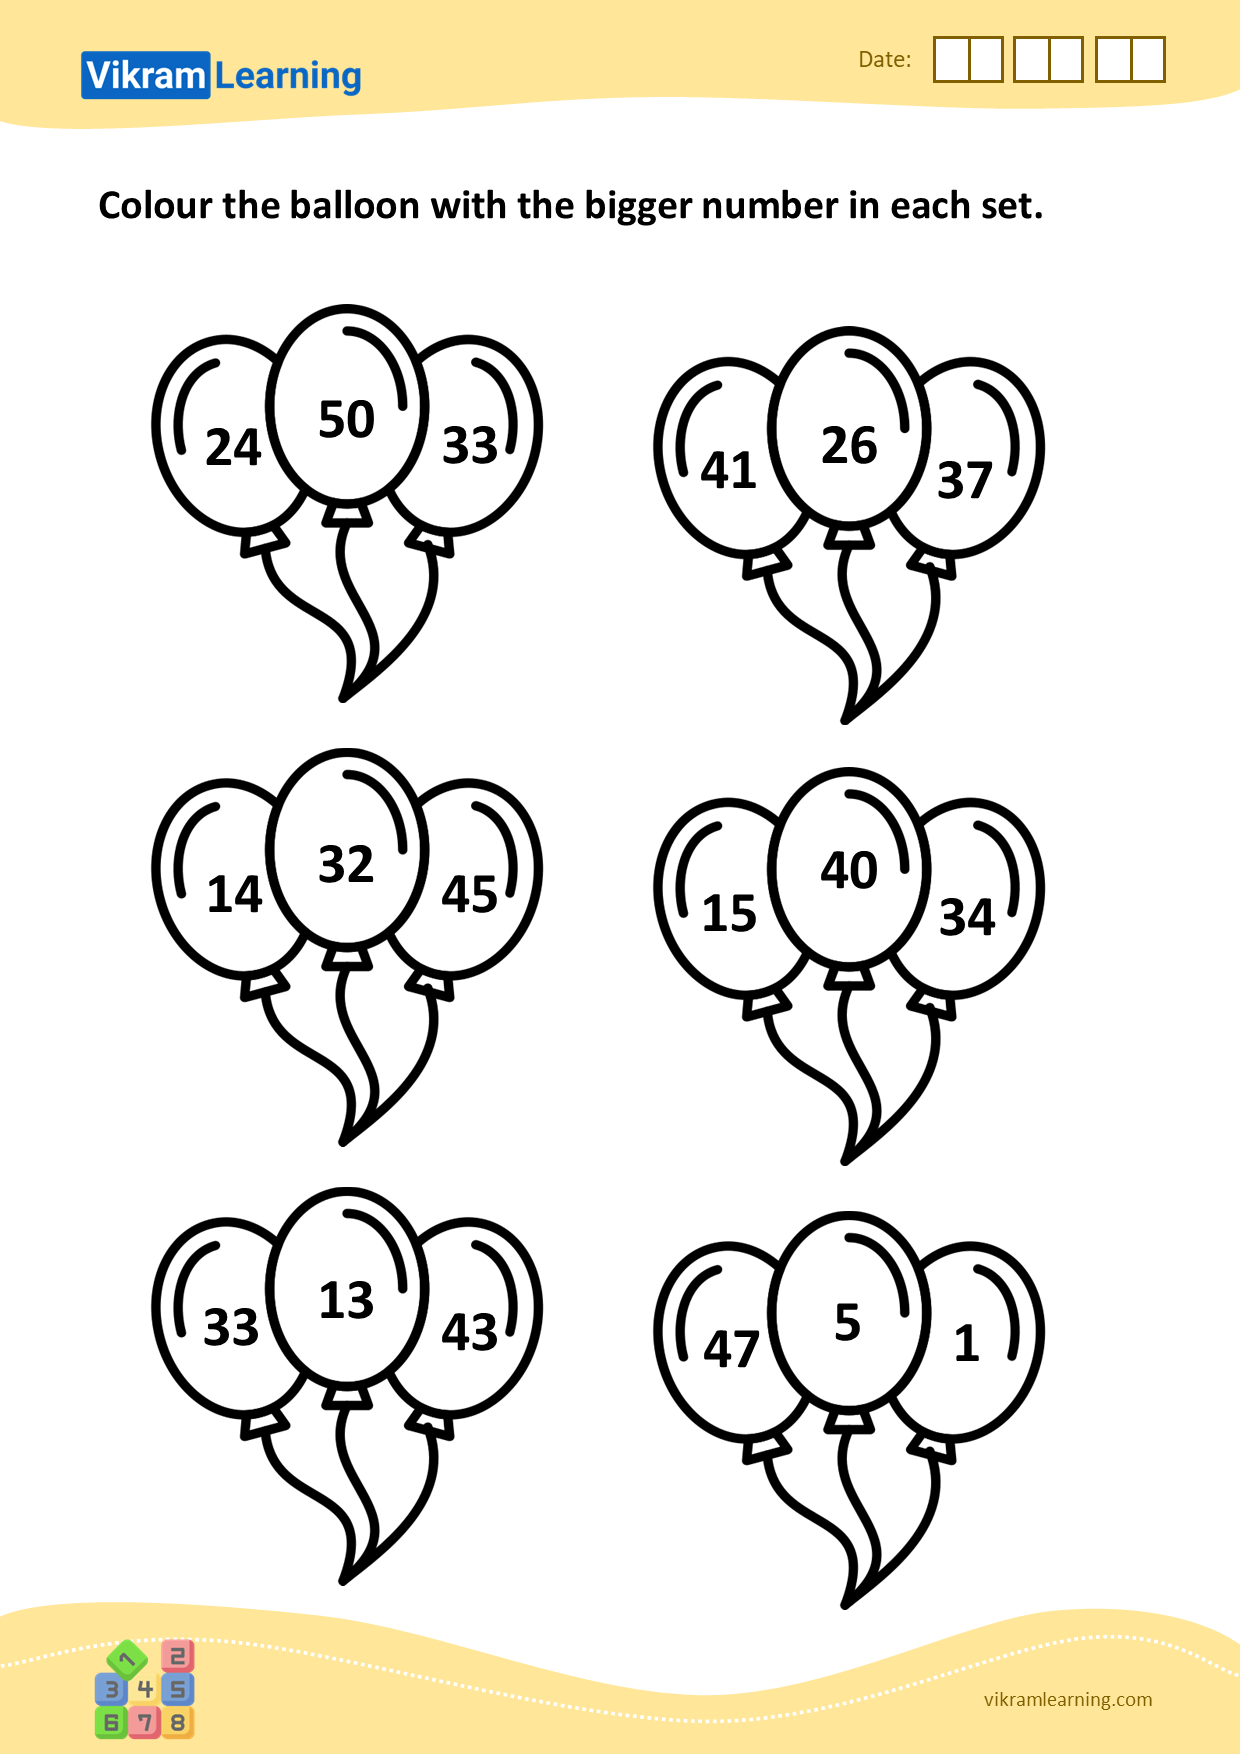 download-colour-the-balloon-with-the-bigger-number-in-each-set